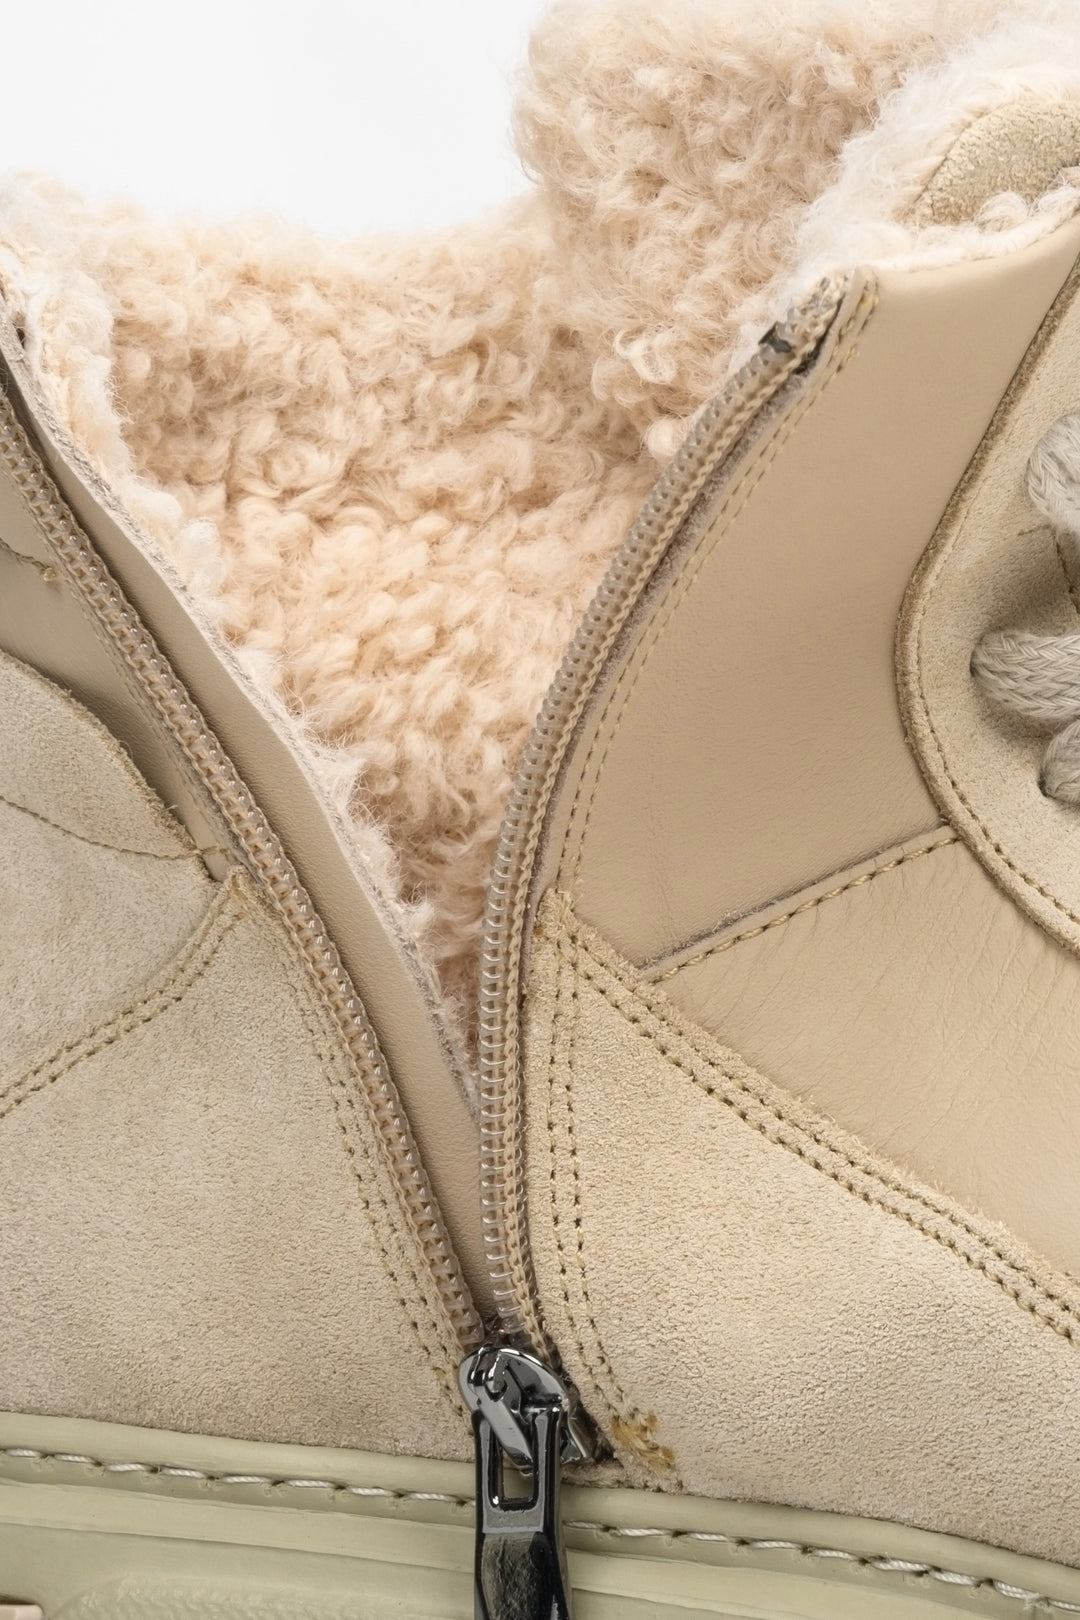 Women's sneakers in beige for winter by ES 8 - lined interior.